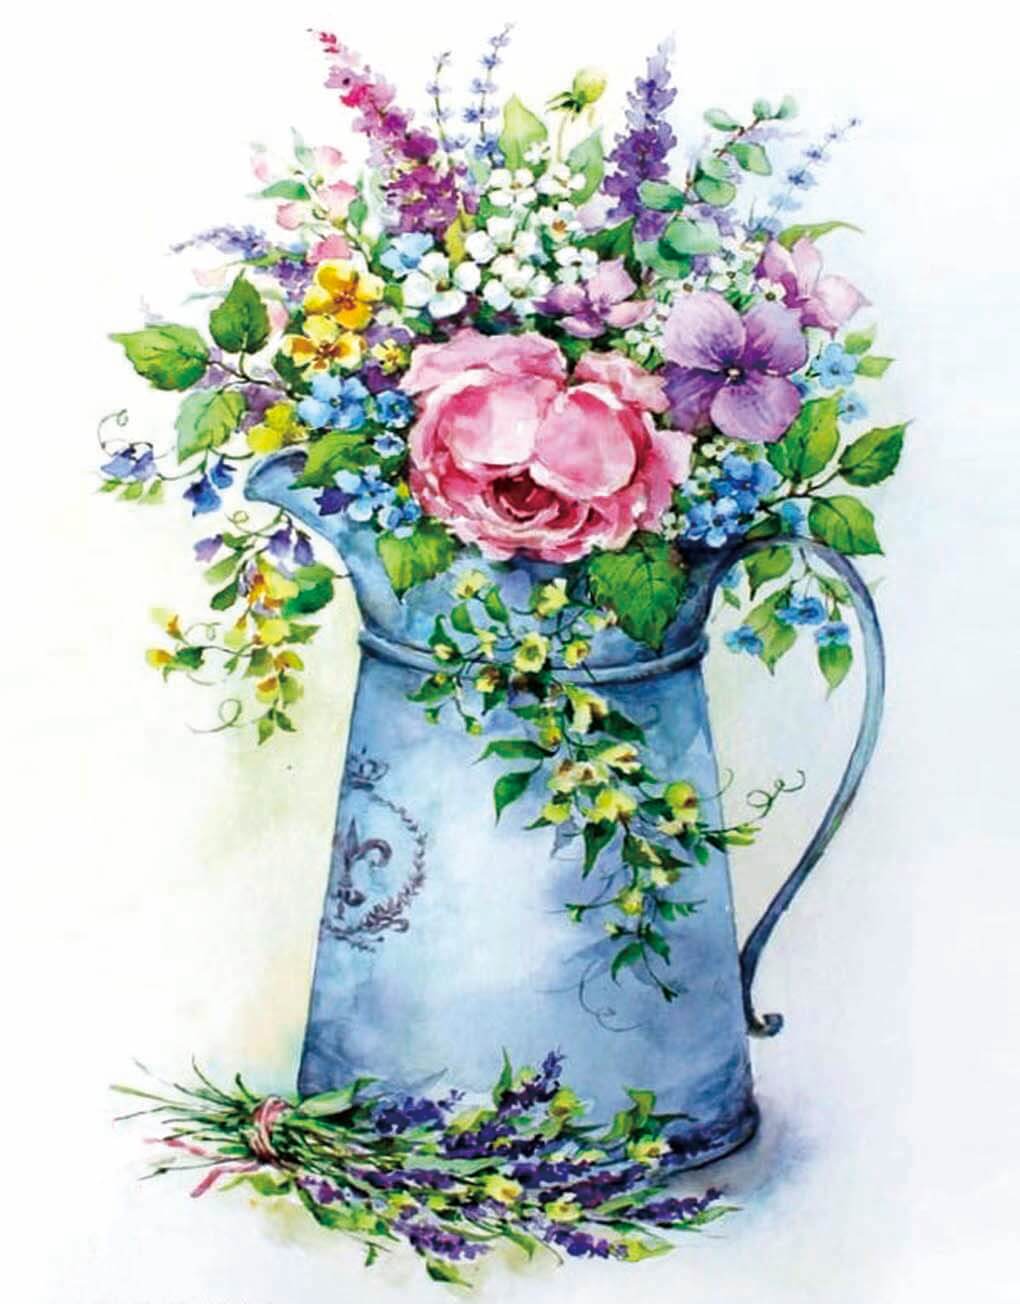 Diamond painting - LG149e - Romantic bouquet in a watering can Image 1